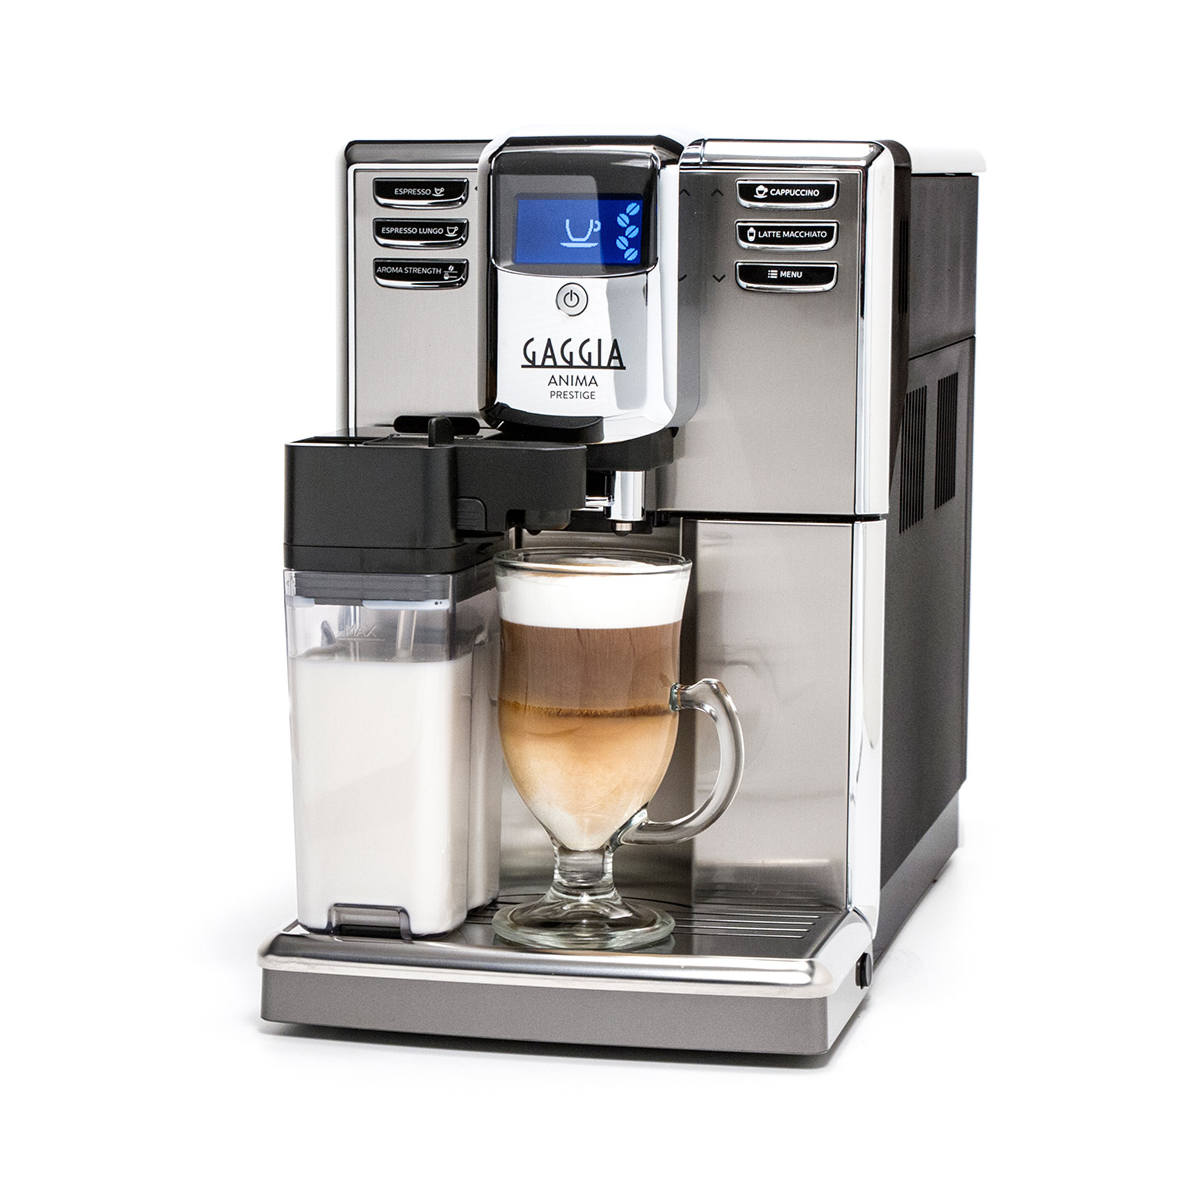 Maintaining this espresso machine is quick and hassle-free, thanks to its removable water tank that simplifies refills and upkeep. Additionally, the automatic cleaning and descaling cycles ensure peak performance and ensure your espresso experience remains unmatched.